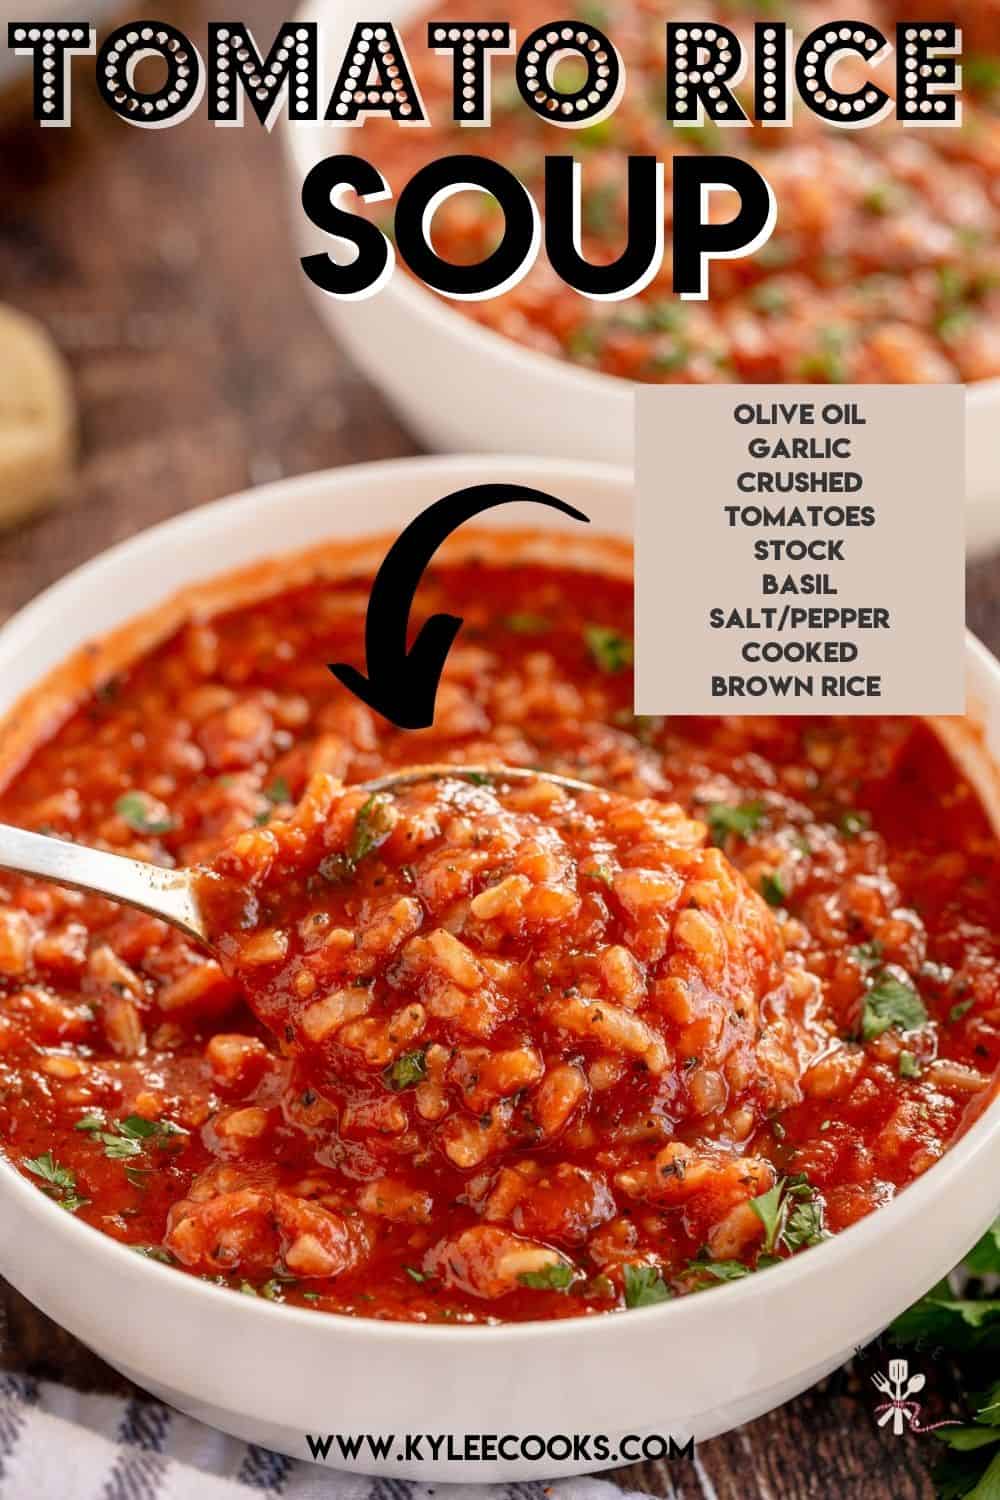 tomato rice soup with recipe title overlaid in text